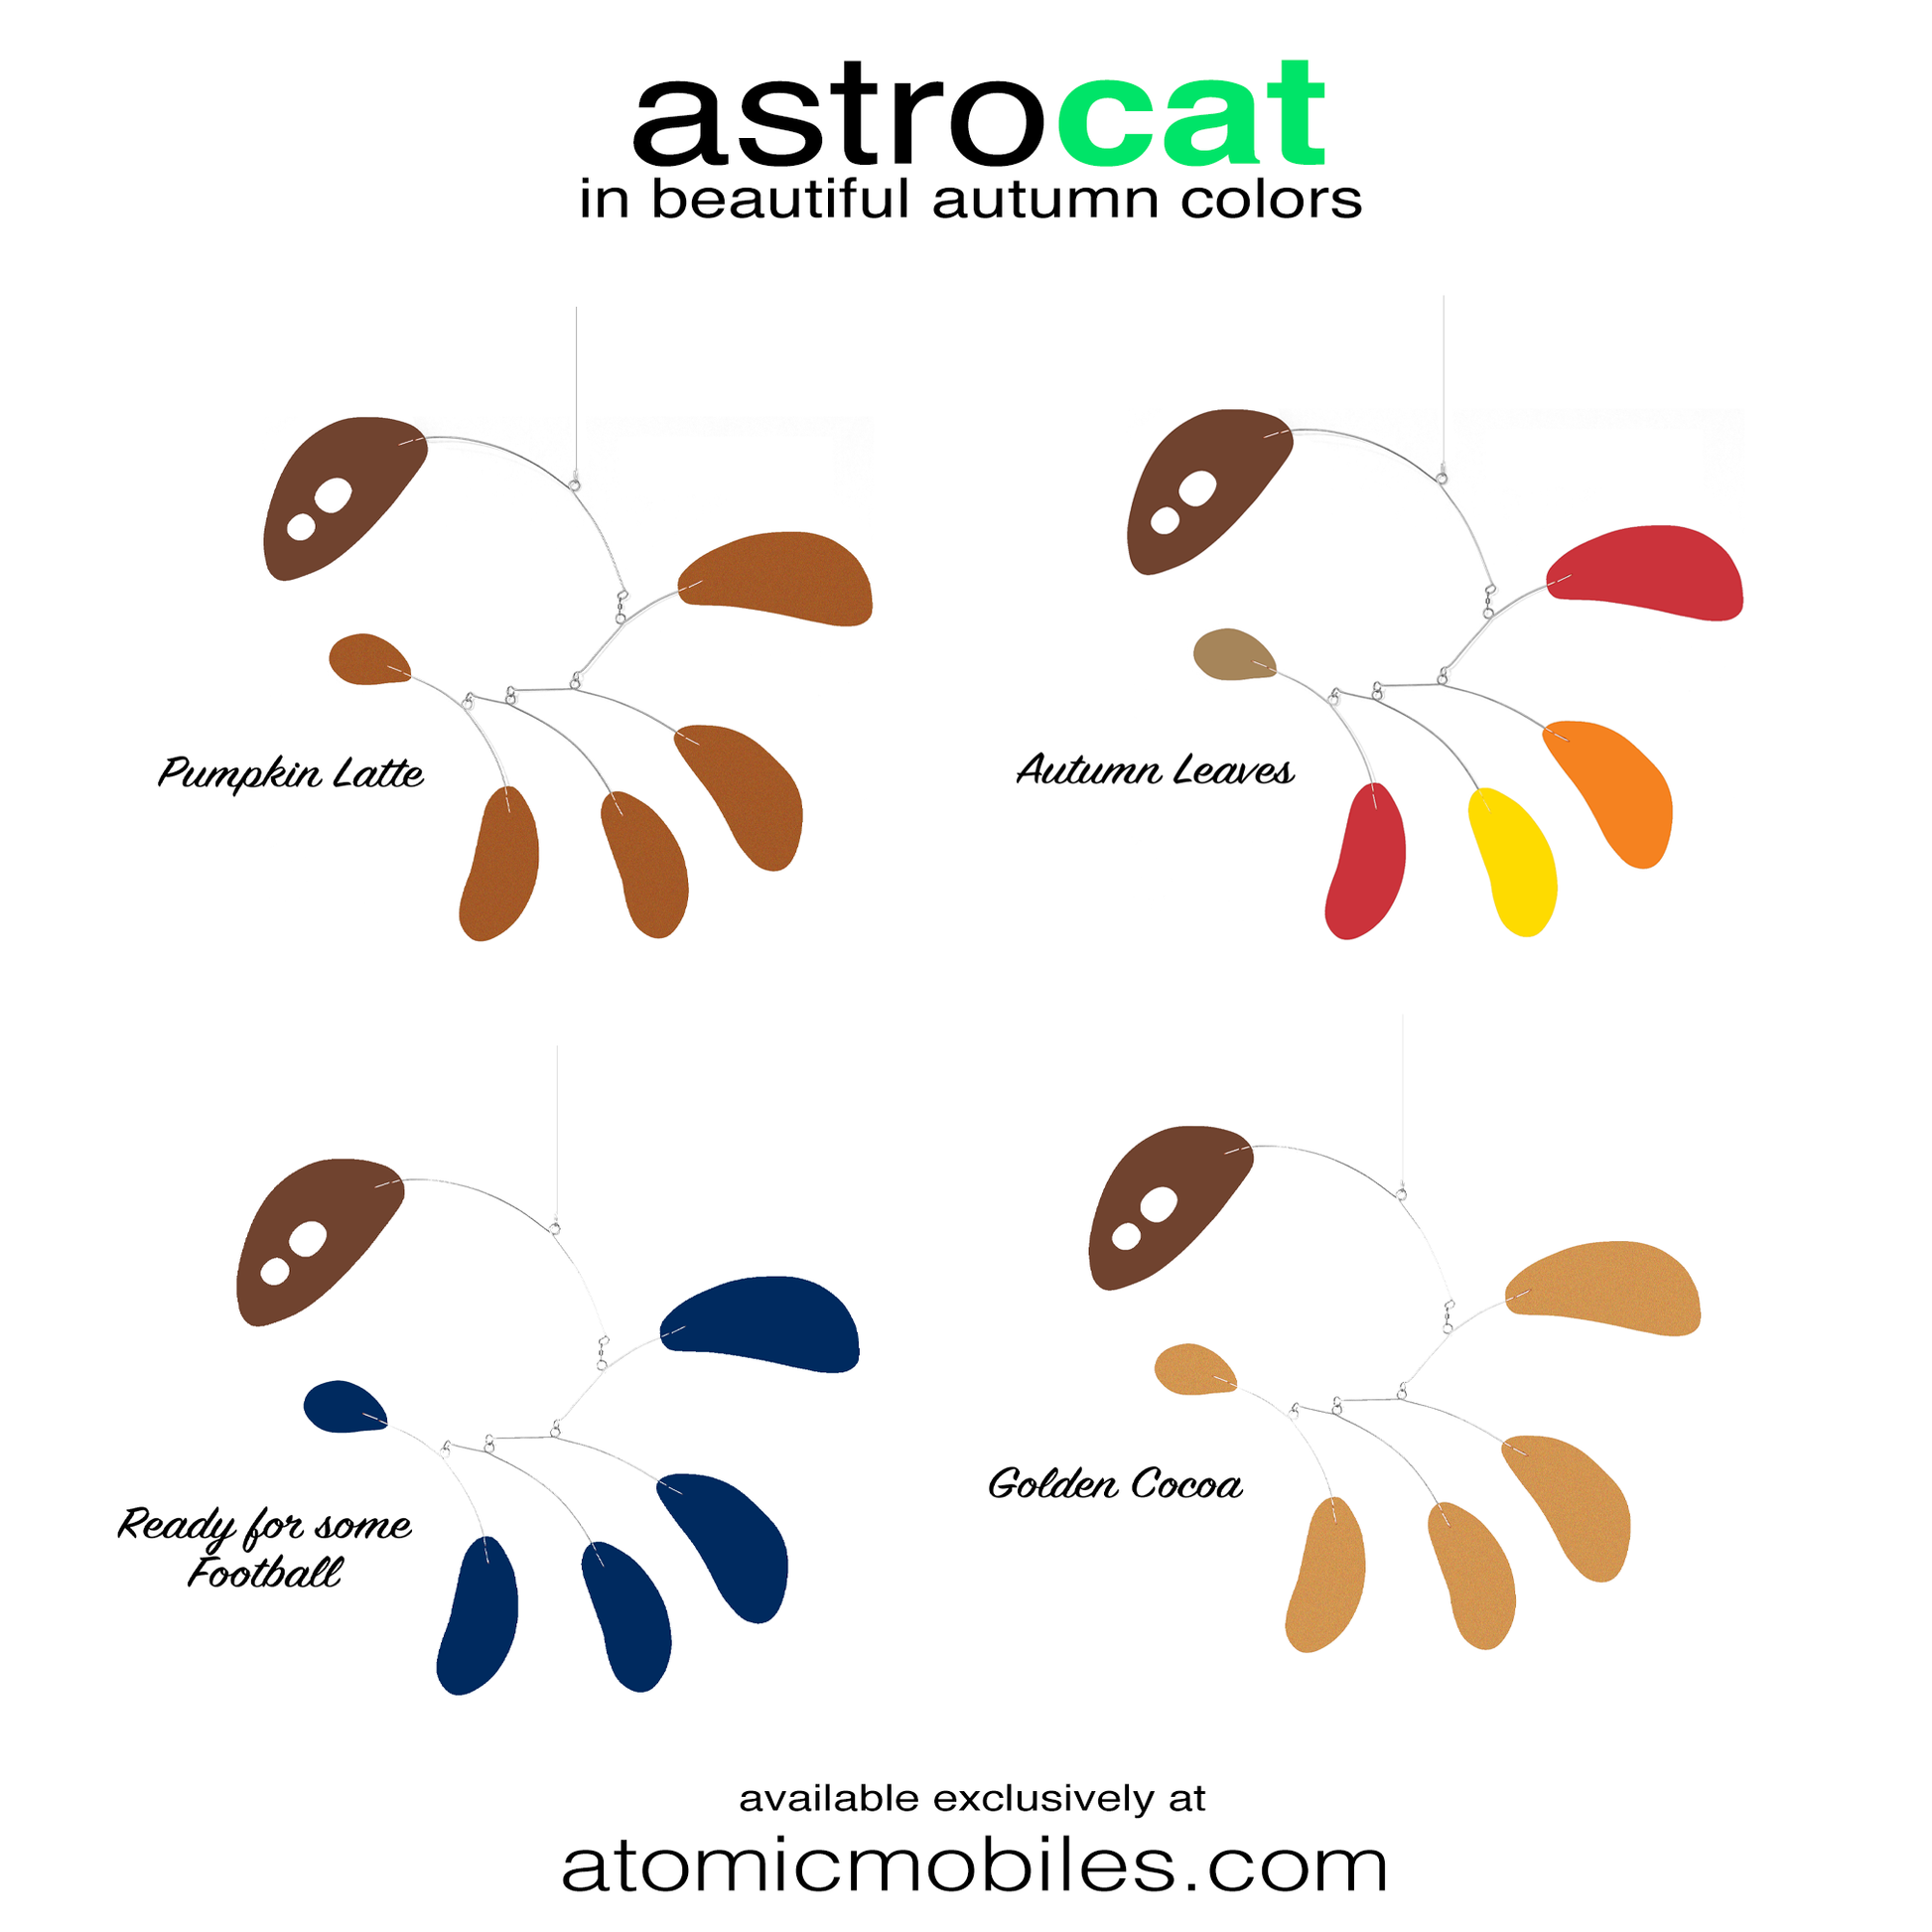 ASTROCAT hanging art mobiles in beautiful autumn colors of brown, cocoa, red, yellow, orange, navy, and brown by AtomicMobiles.com